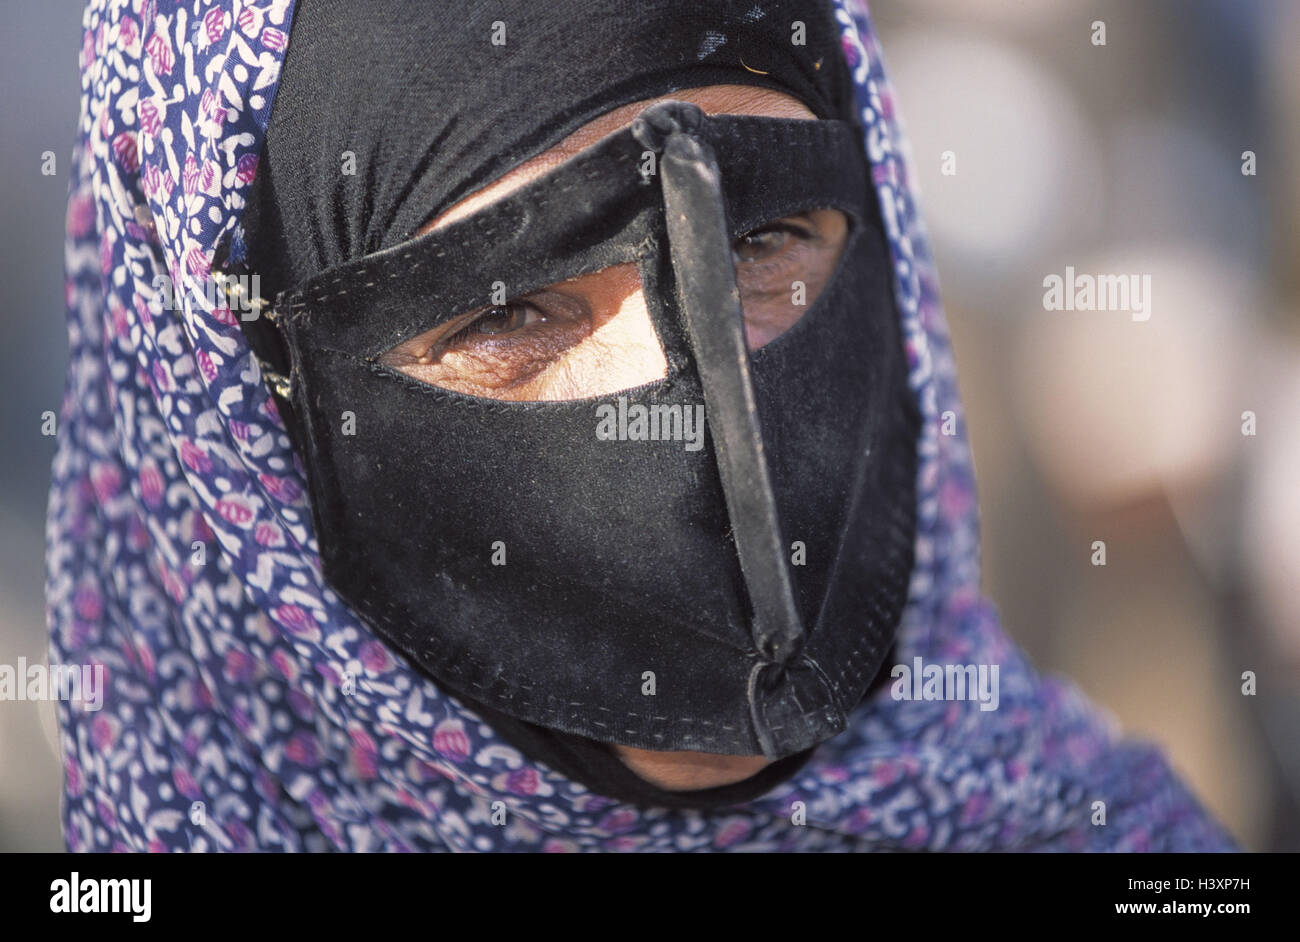 Iran, island Queshm, woman, veils, portrait, no model release the Near East, the Persian Gulf, south coast, locals, Iranian, veil, Batalu, facial veil, mask, headscarf, brightly, patterned, Islam, faith, religion, clothes, traditionally, tradition, cultur Stock Photo